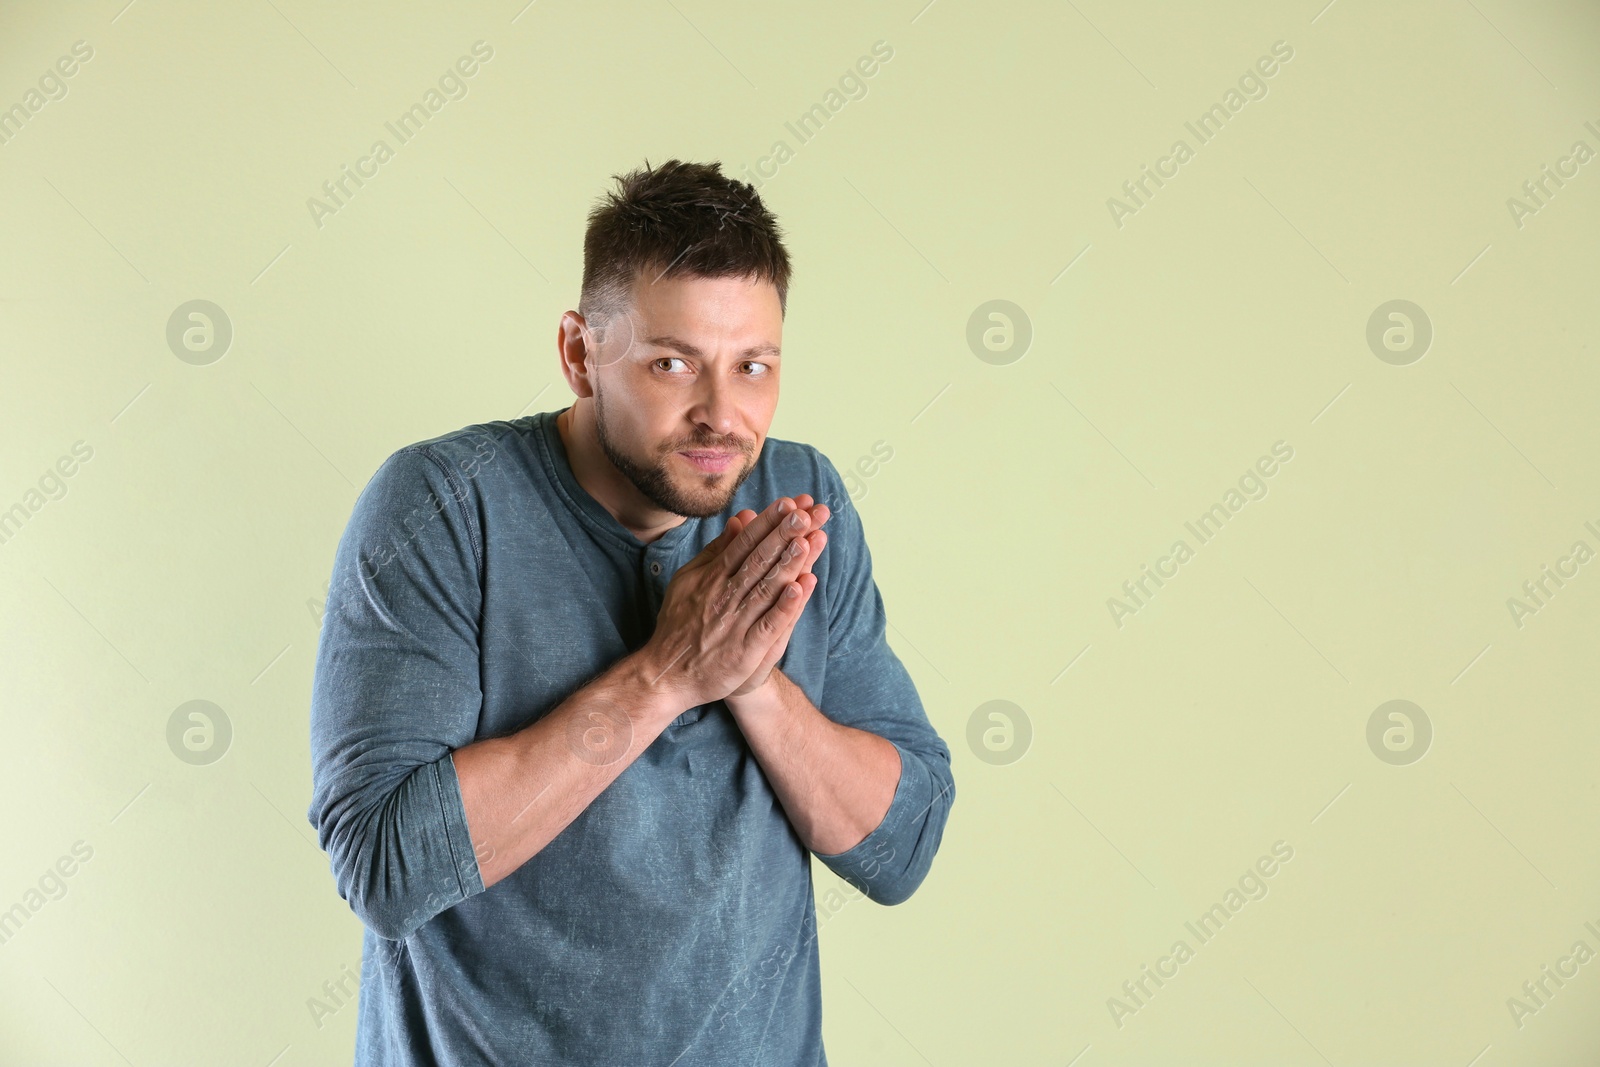 Photo of Greedy man rubbing hands on light background, space for text